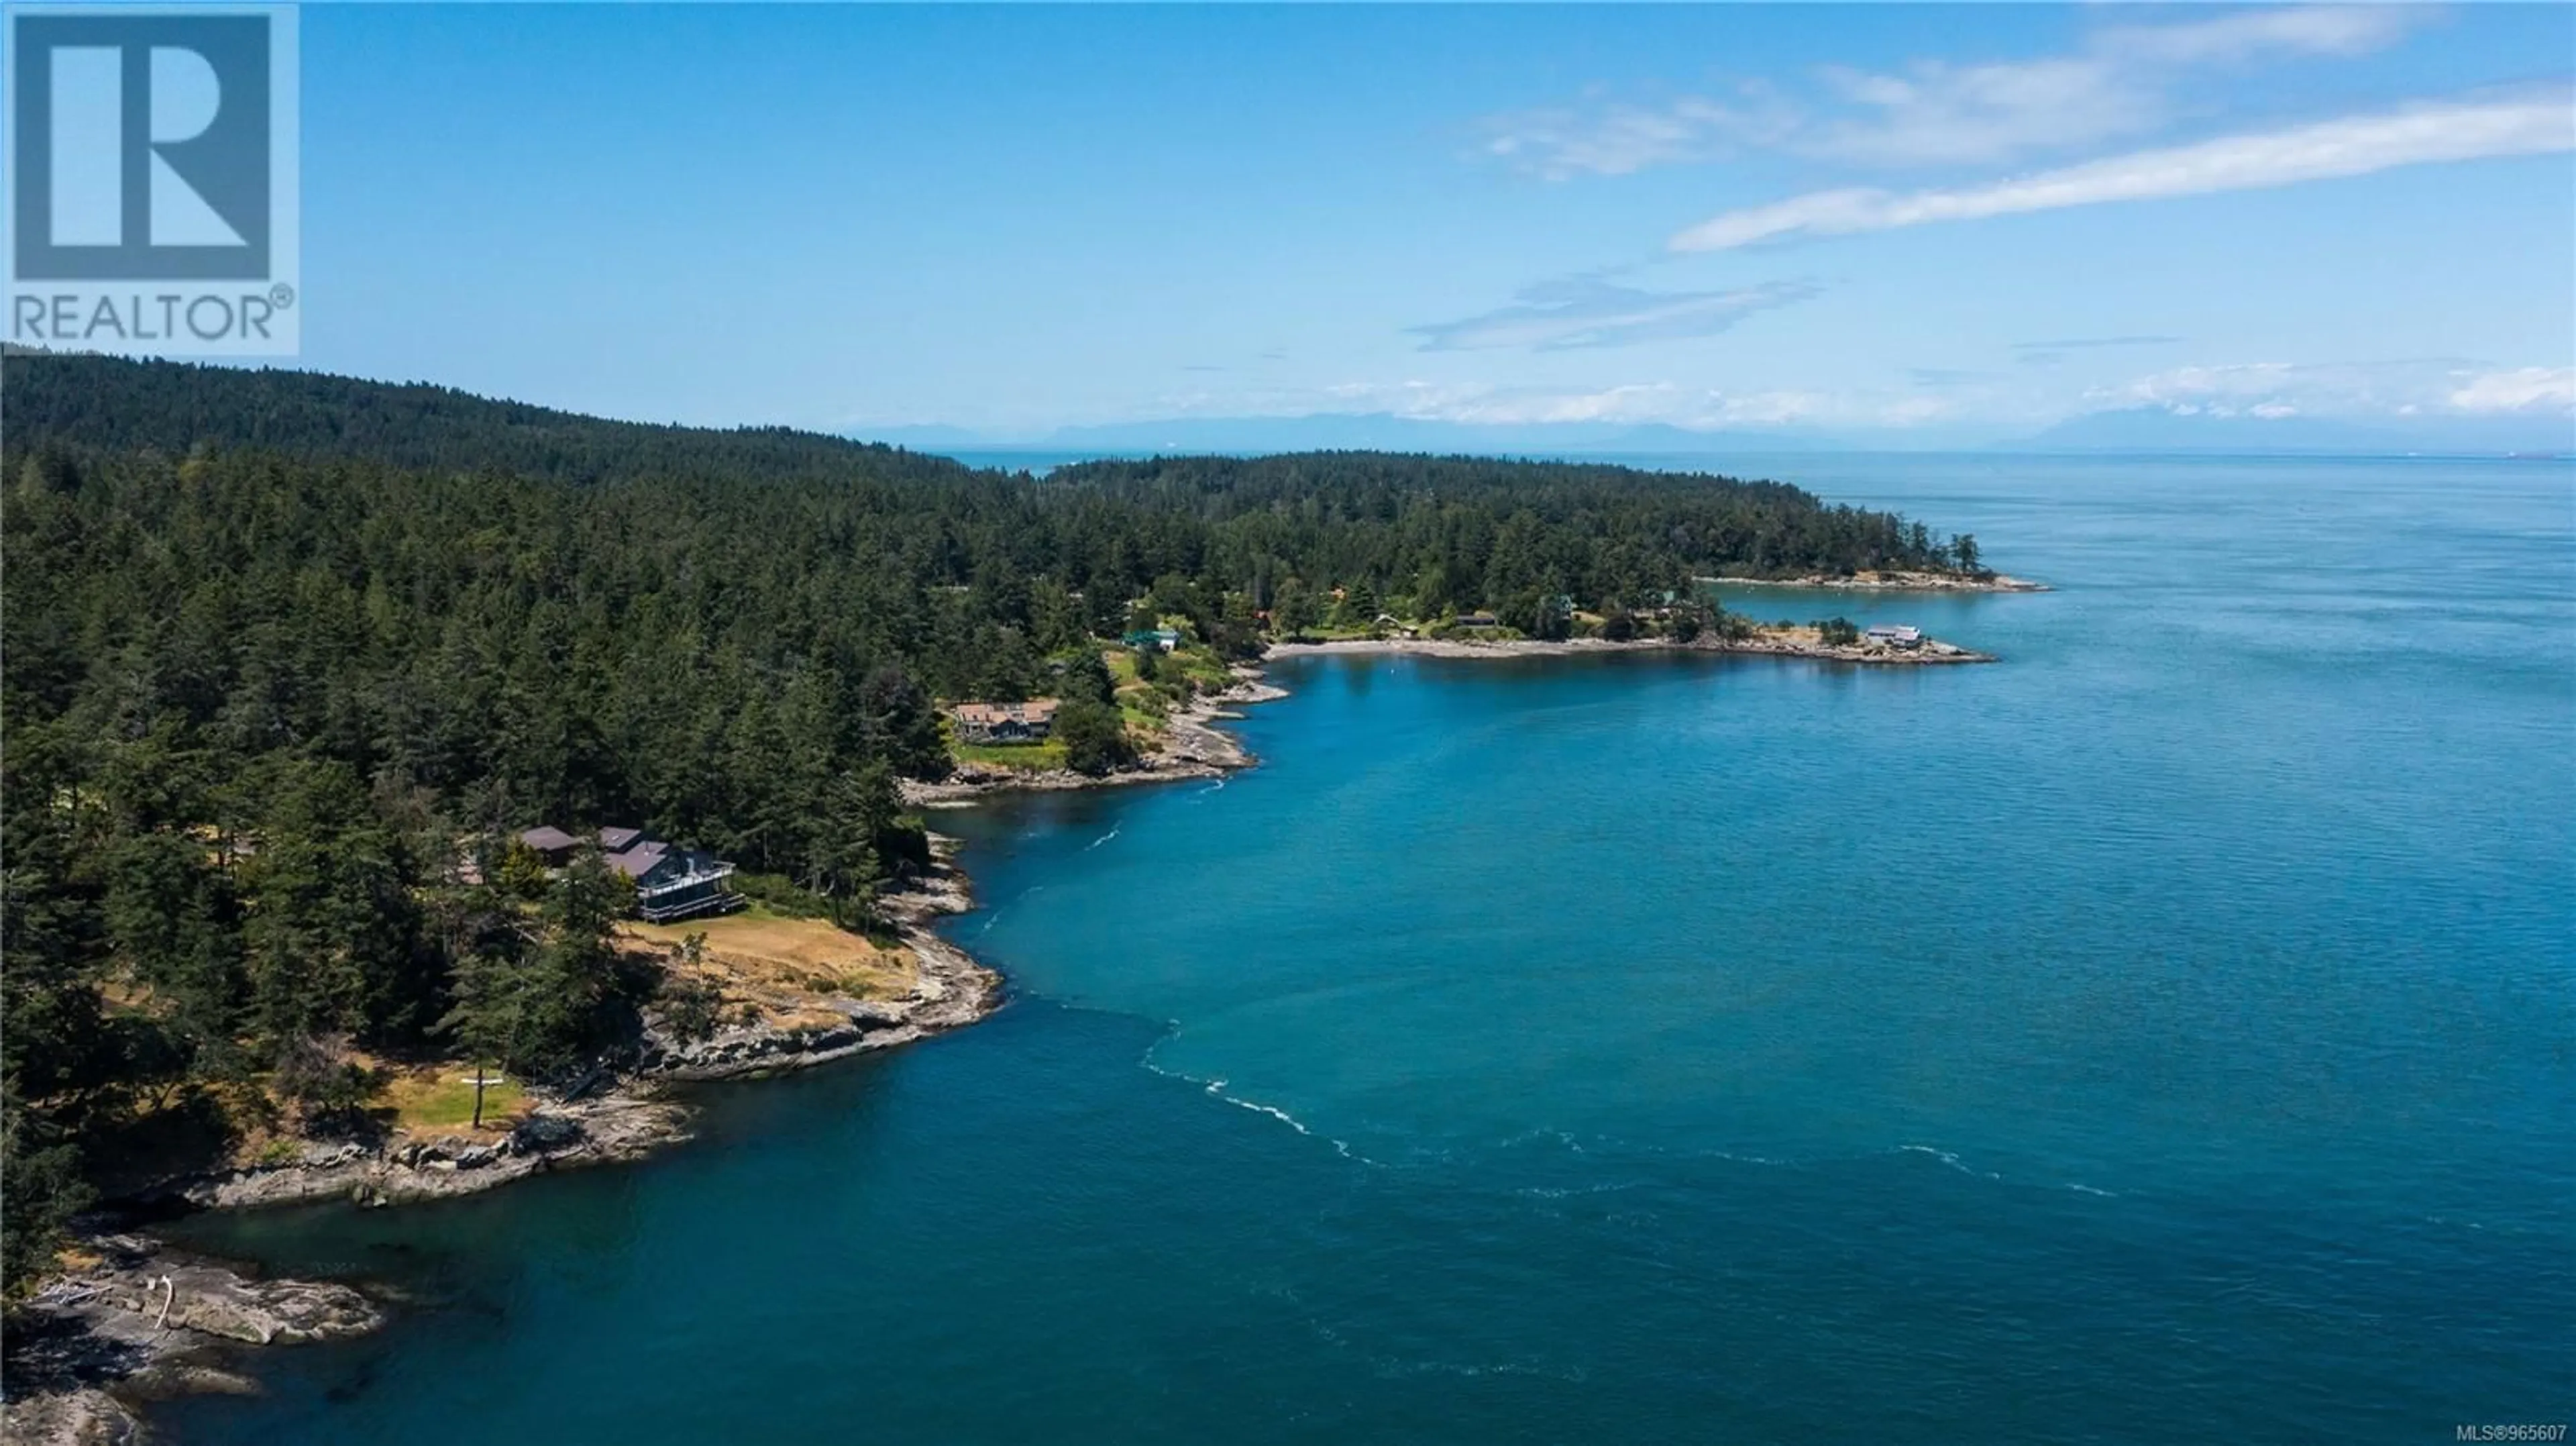 Lakeview for 379 Mary Ann Point Rd, Galiano Island British Columbia V0N1P0